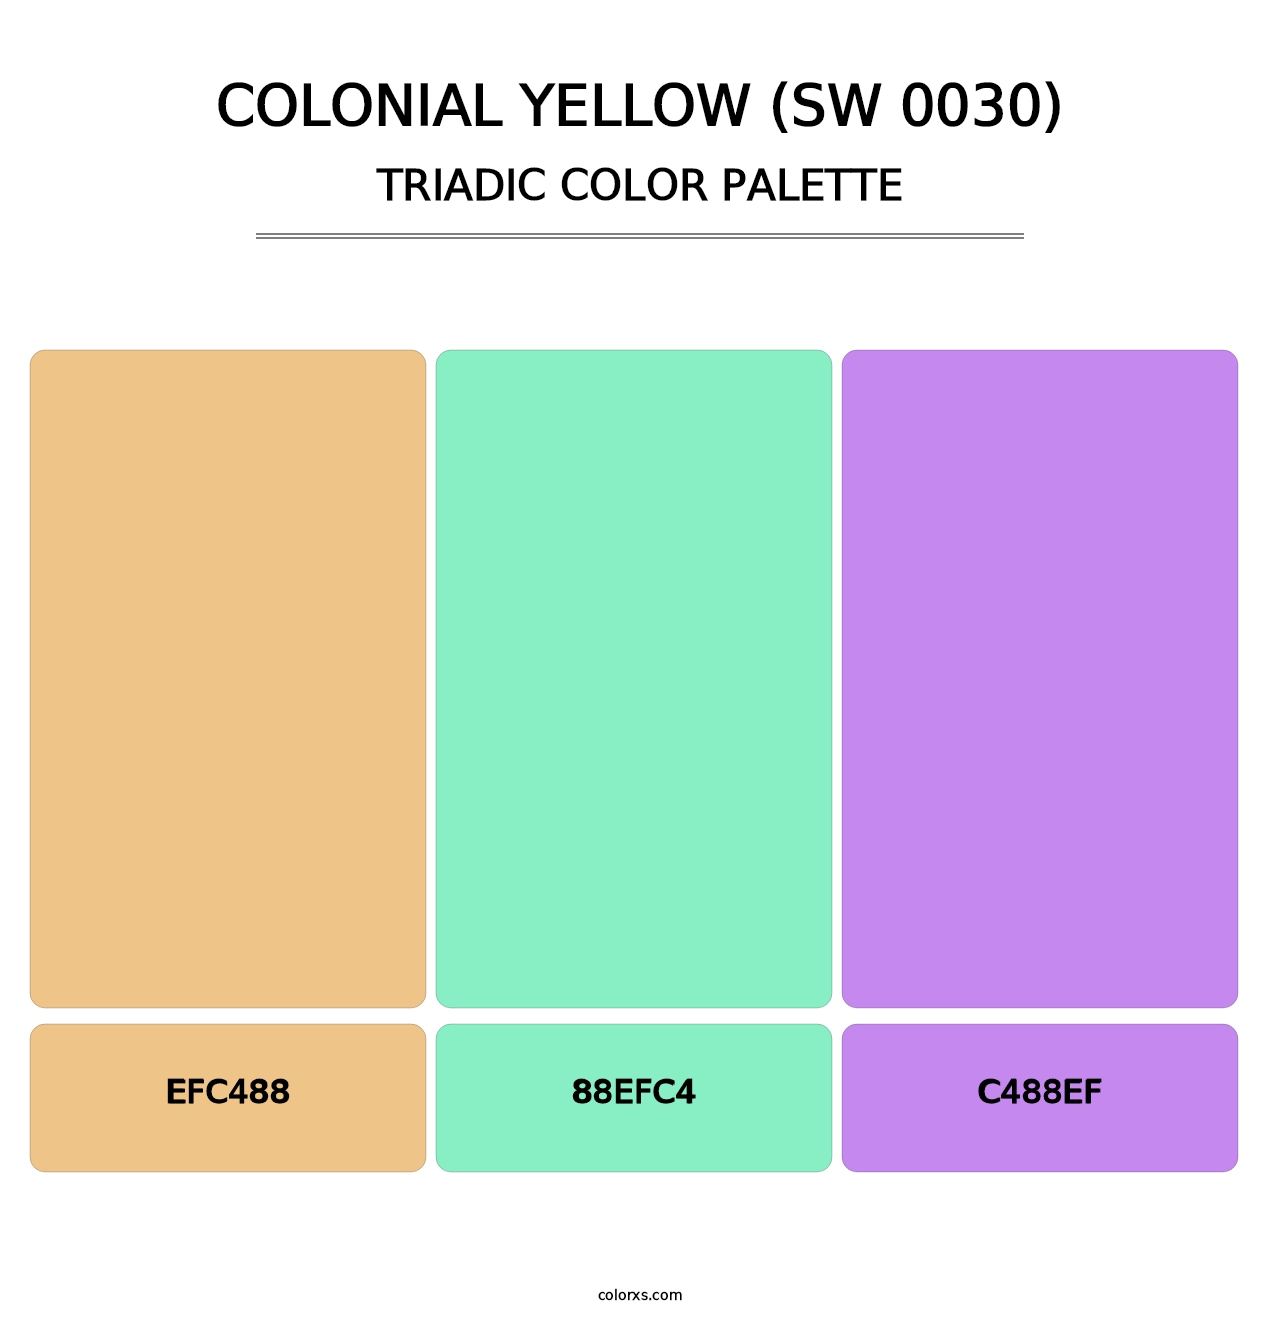 Colonial Yellow (SW 0030) - Triadic Color Palette